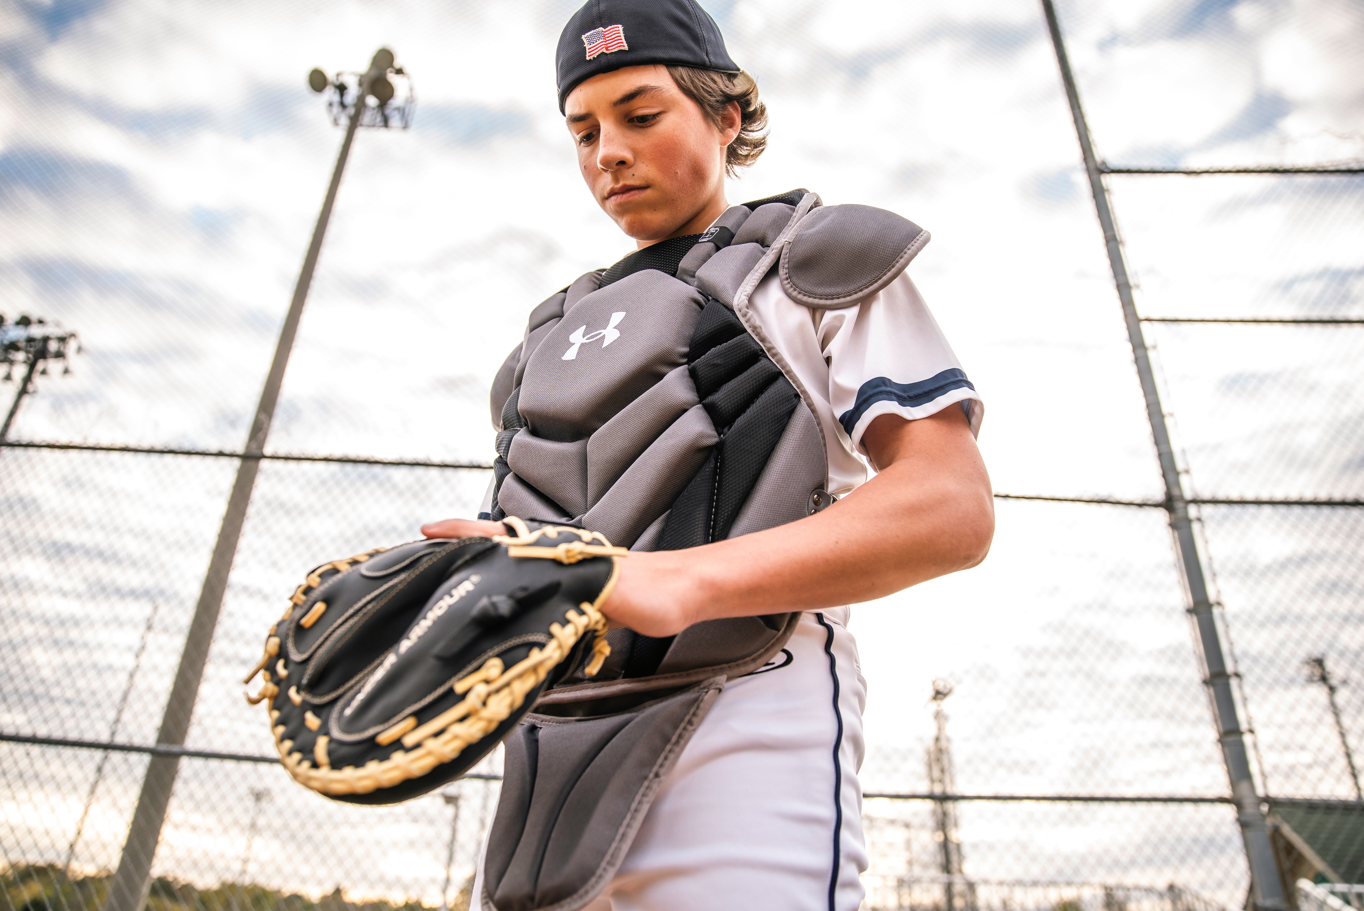 Best Baseball Gloves: Brands, Material, and Styles to Look For